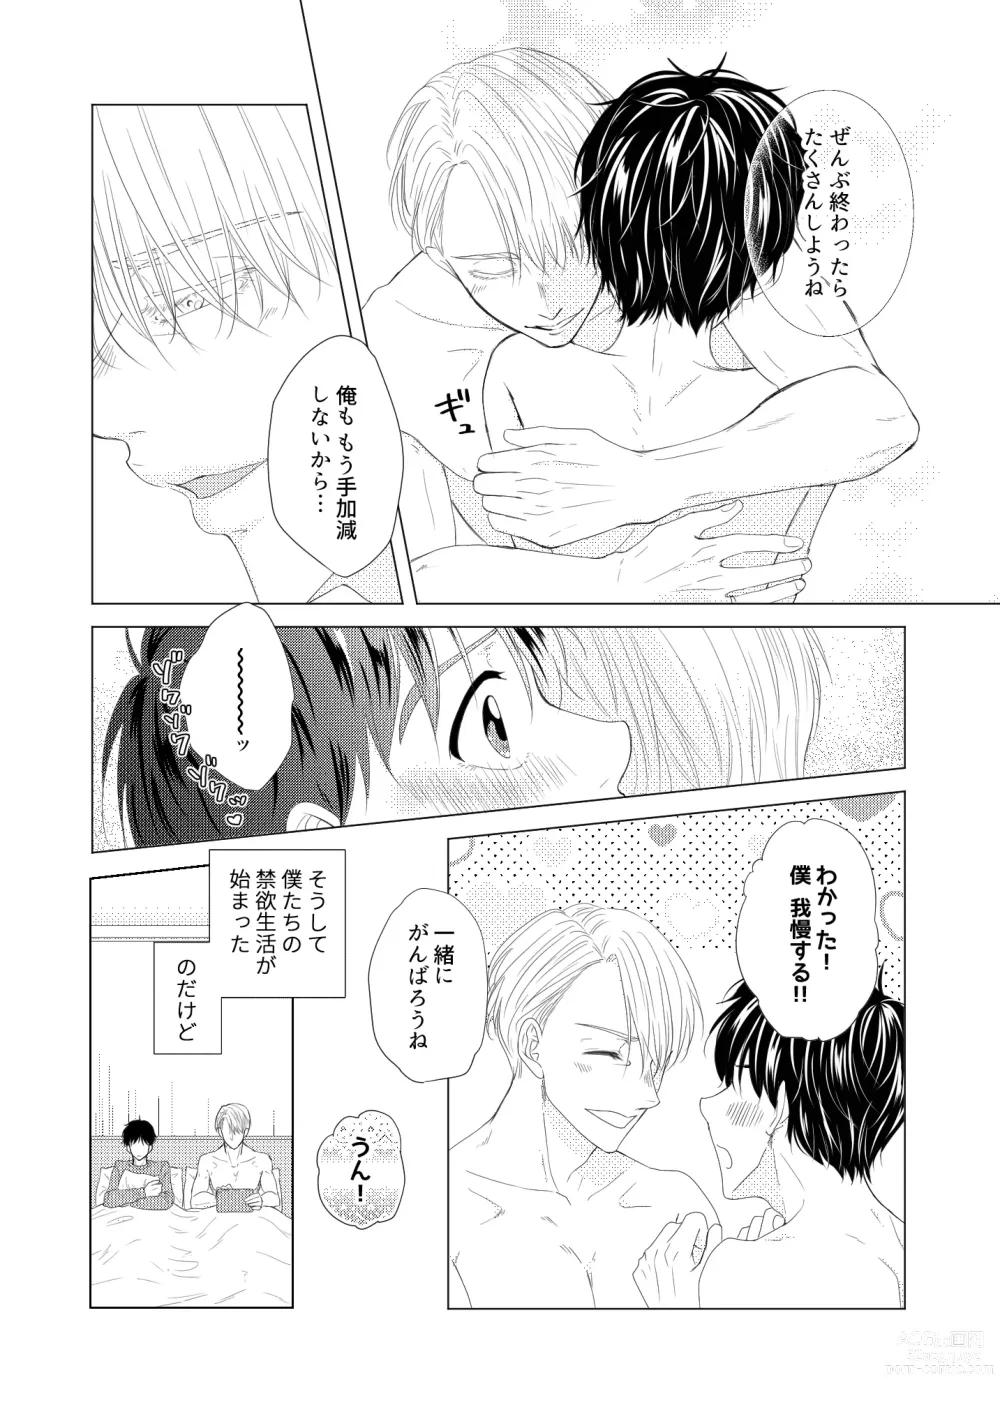 Page 20 of doujinshi Perfect two